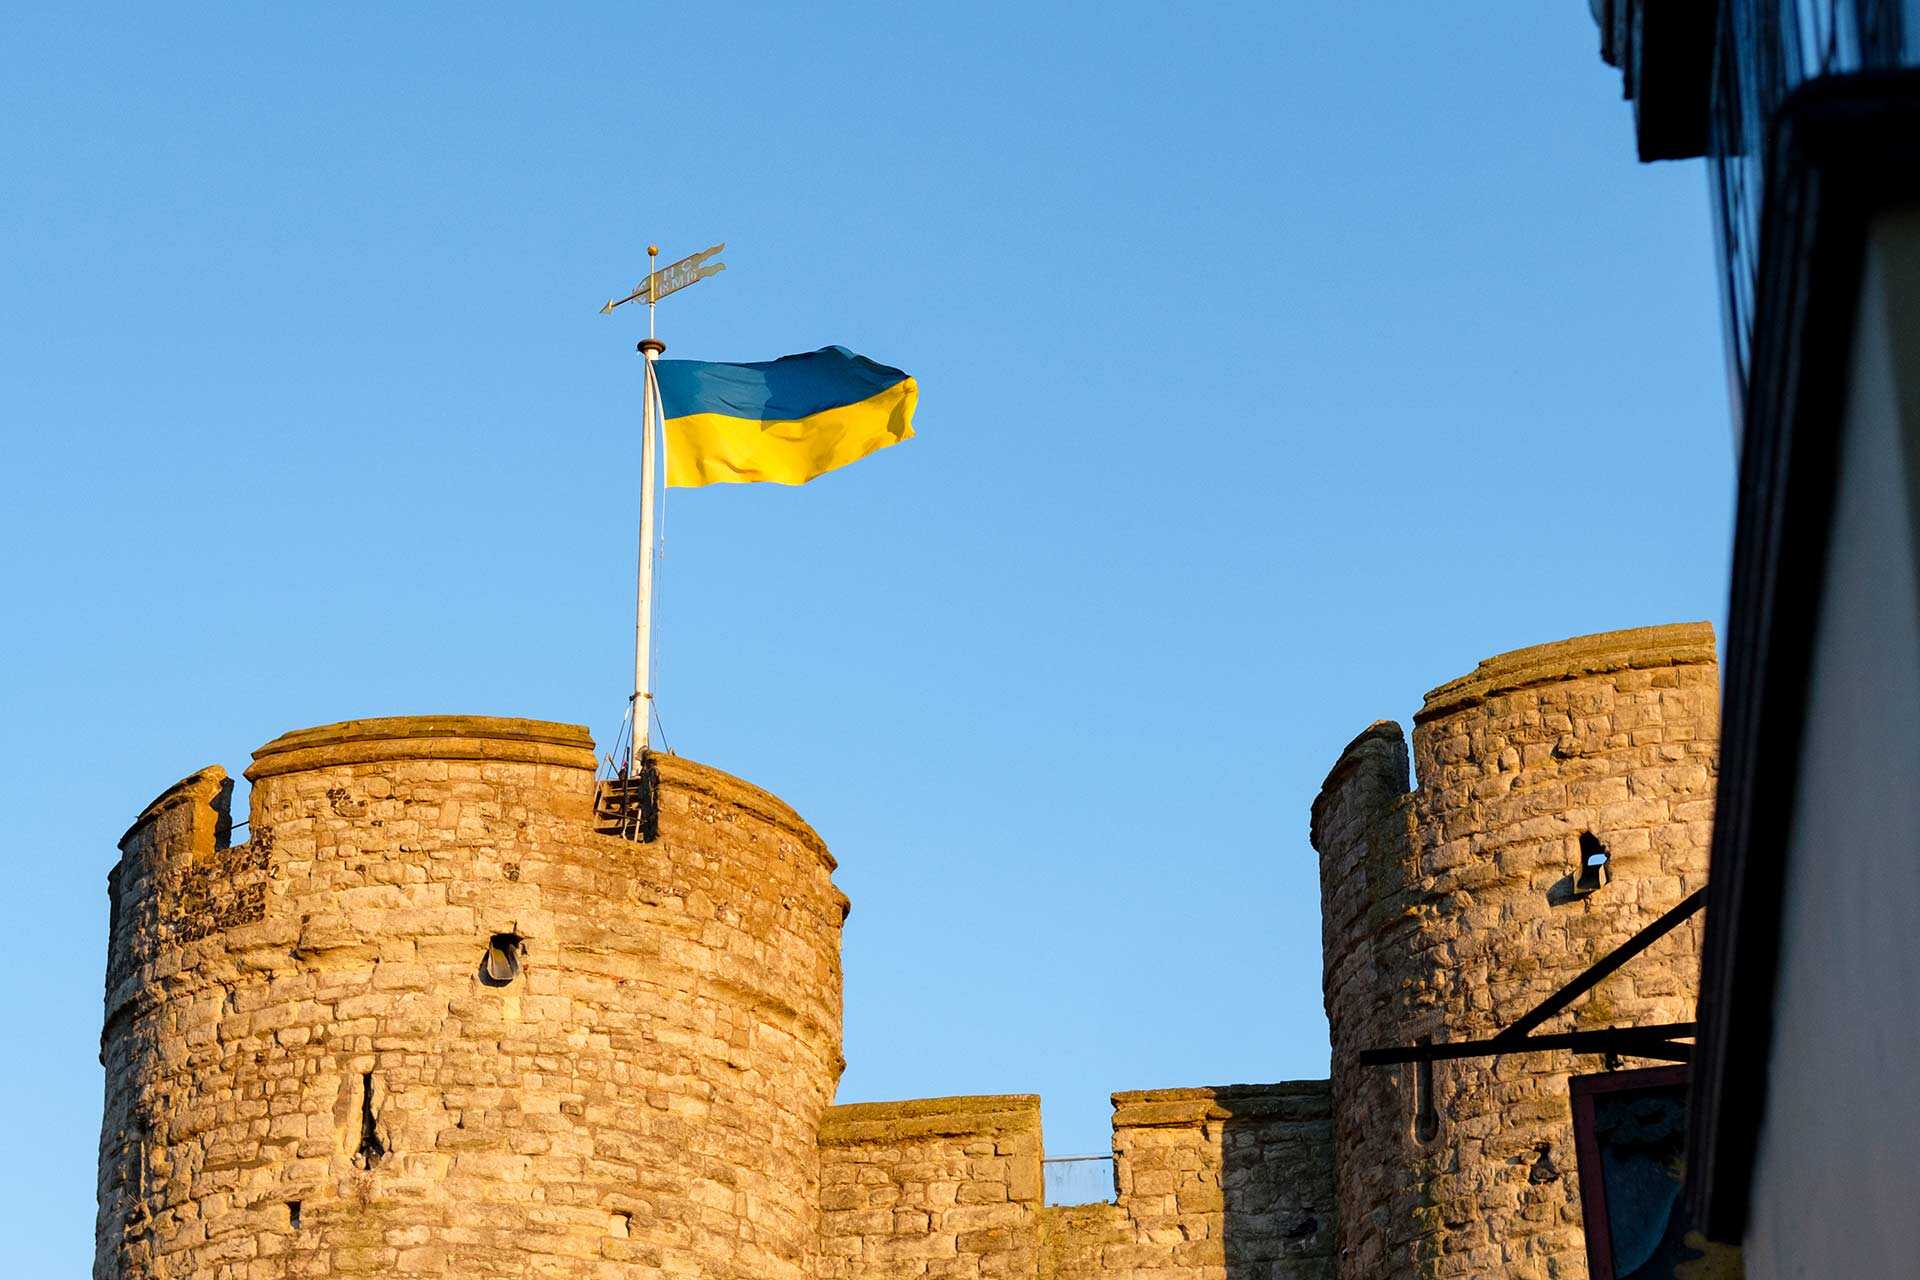 A Ukraine flag over Westgate towers